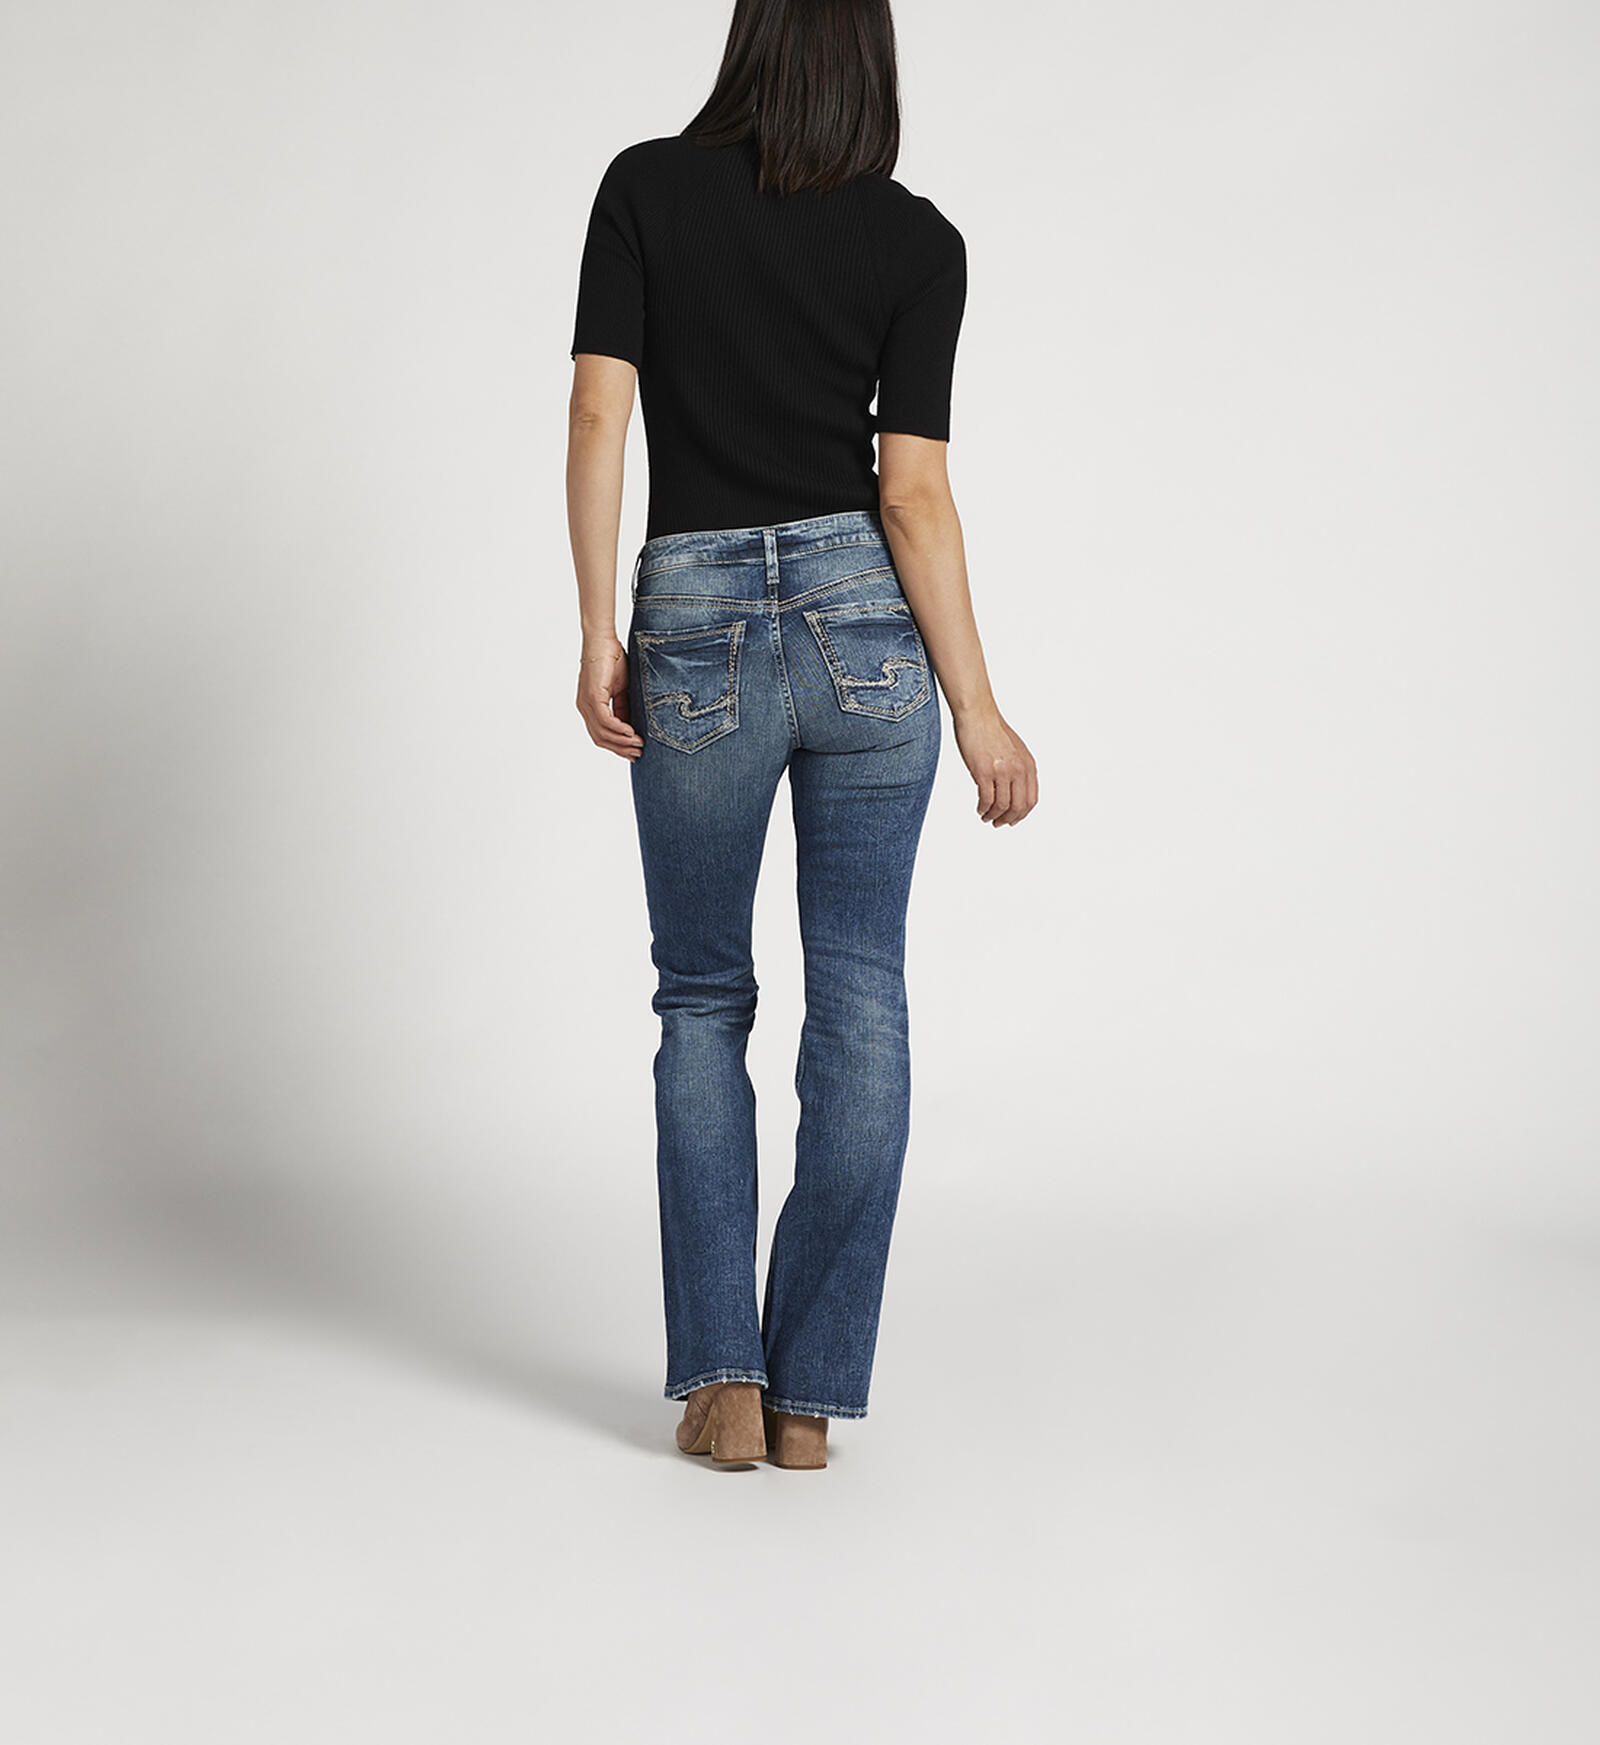 Buy Suki Mid Rise Bootcut Jeans for USD 88.00